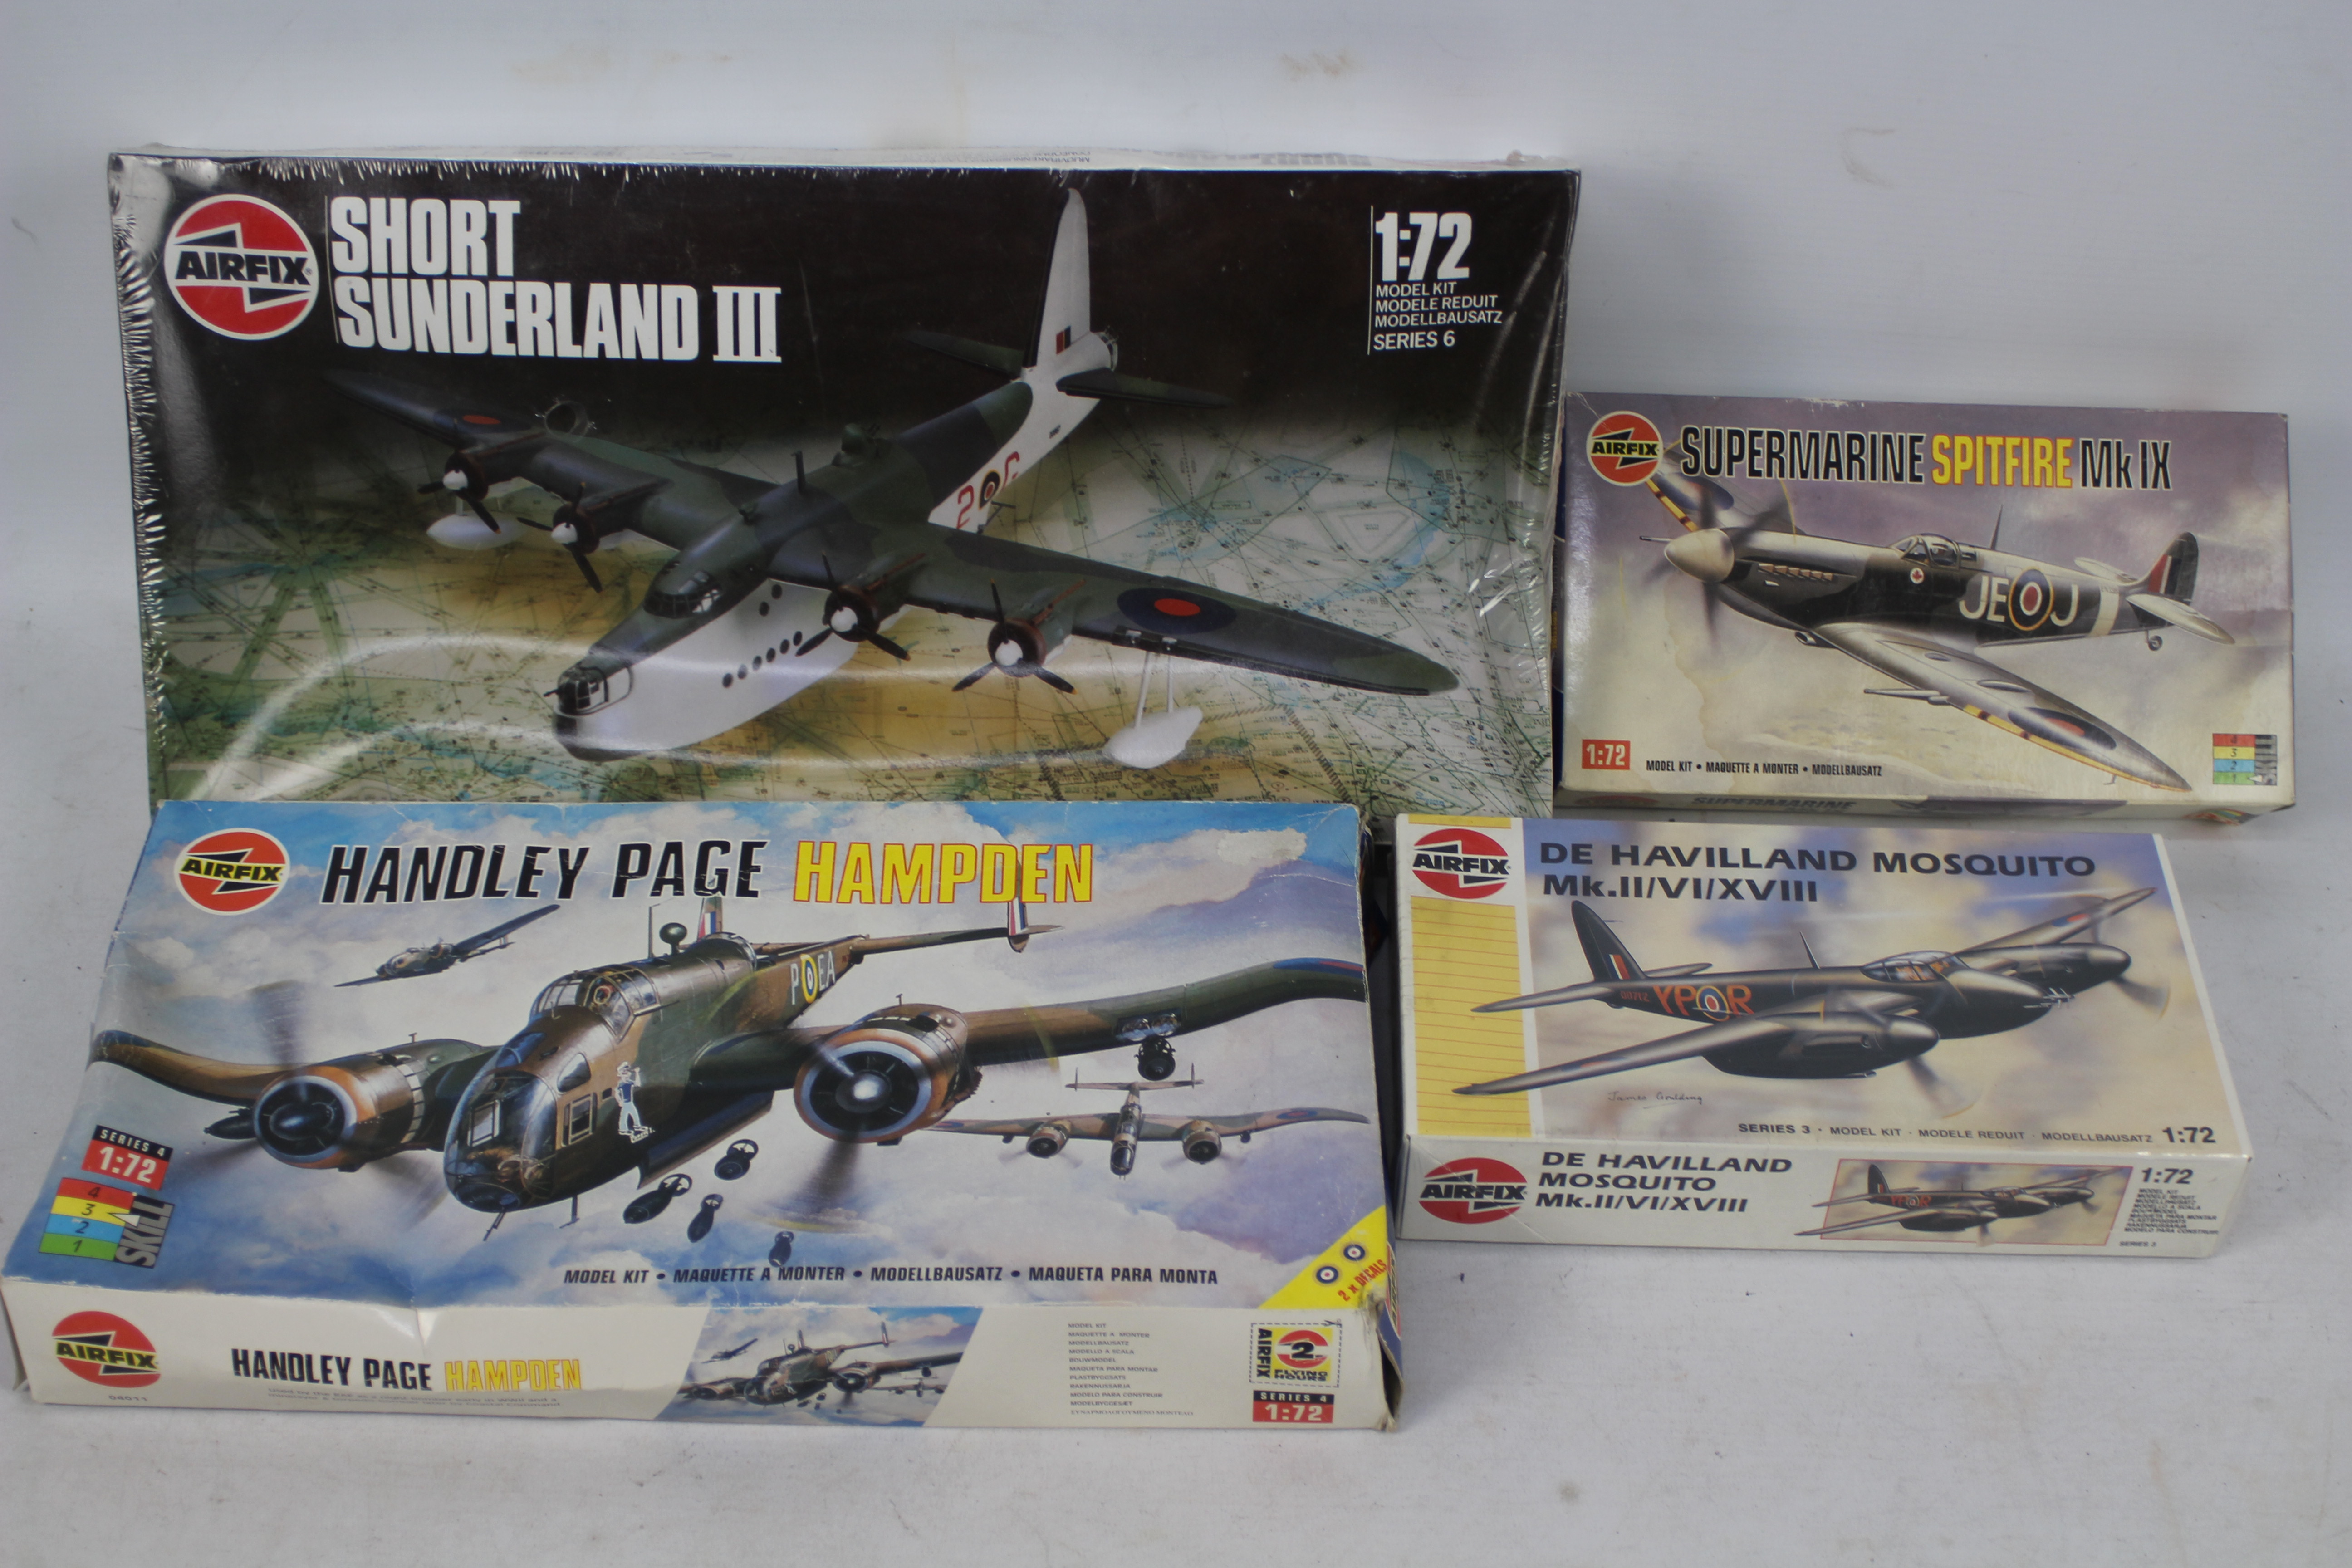 Airfix - Four boxed vintage 1:72 scale plastic model aircraft kits from Airfix.